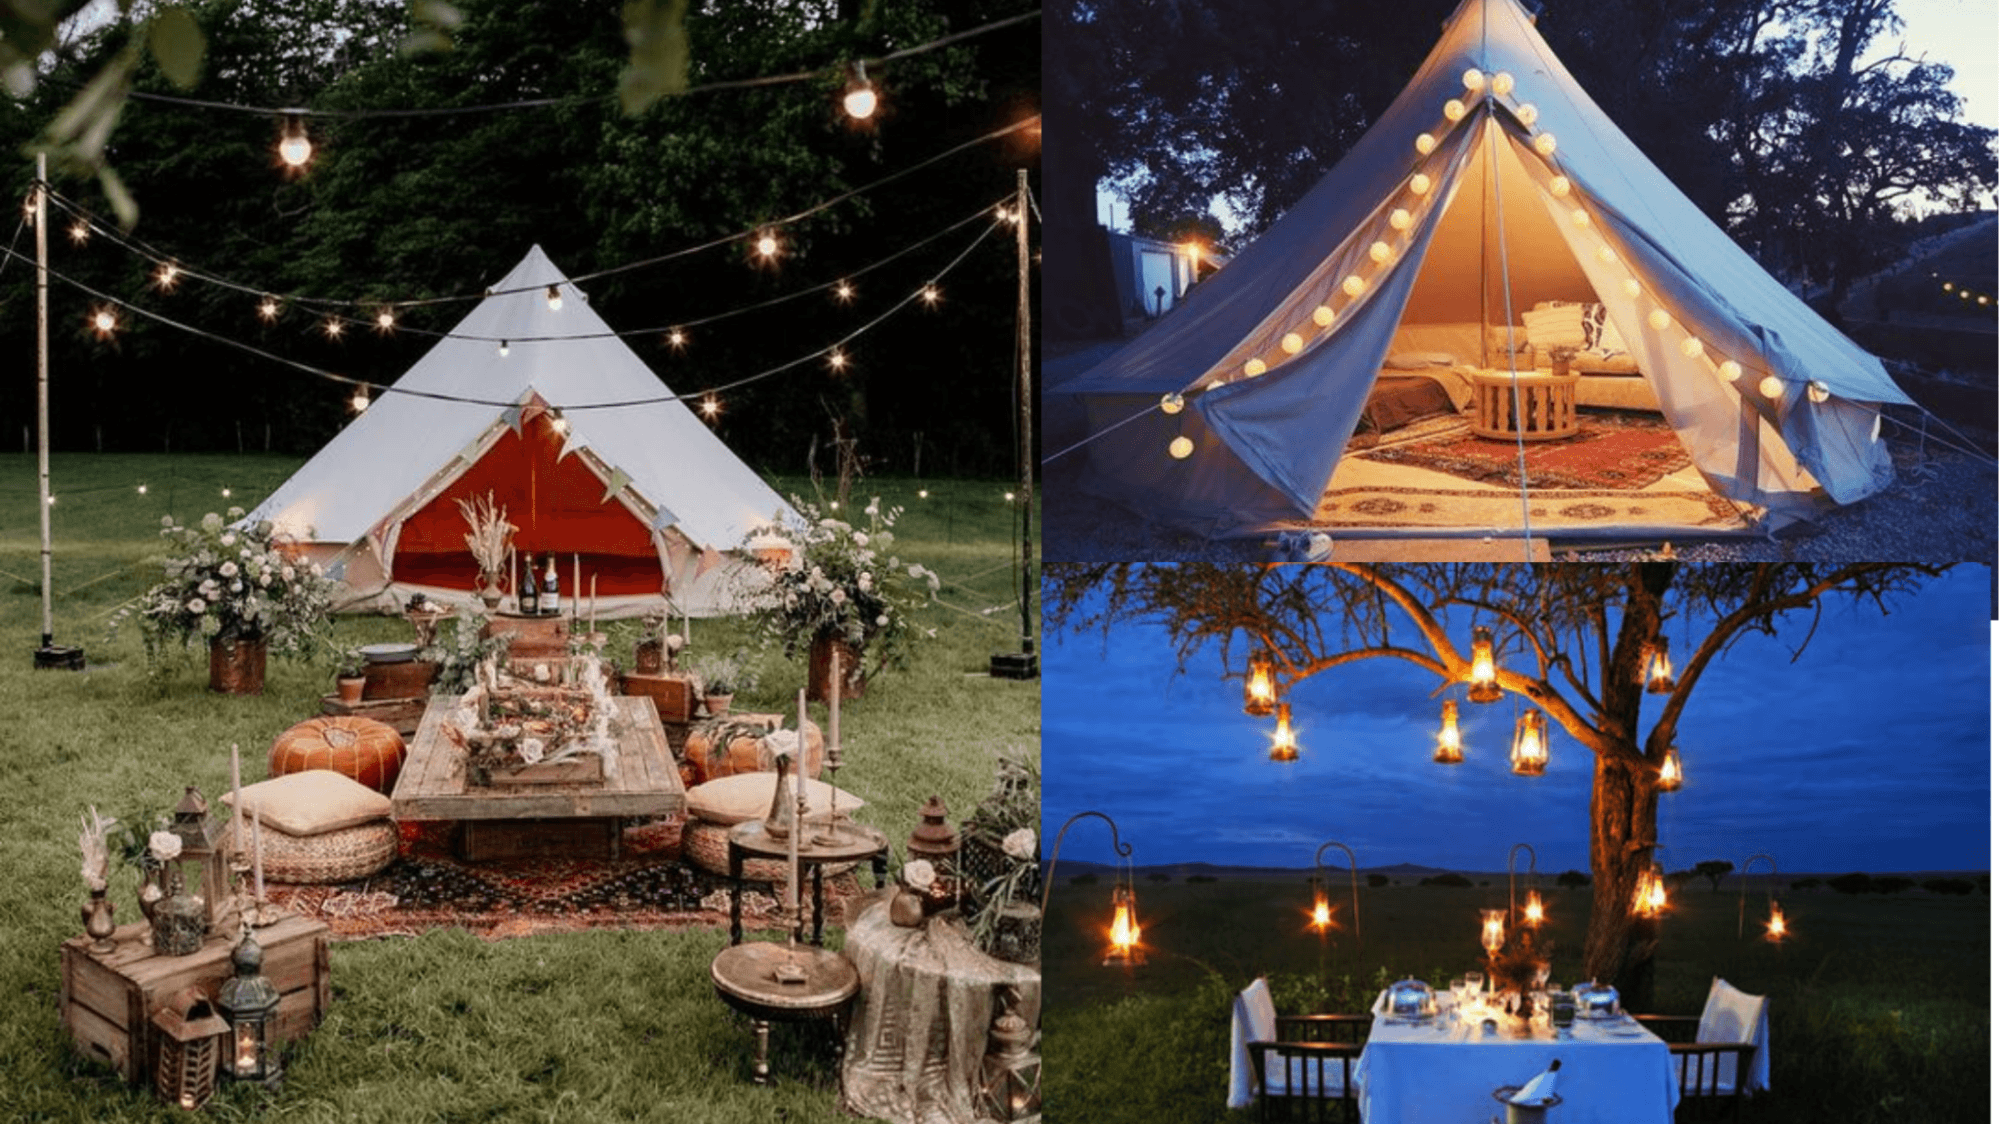 Backyard Glamping Checklist for an Unforgettable DIY Glampsite - Life  inTents